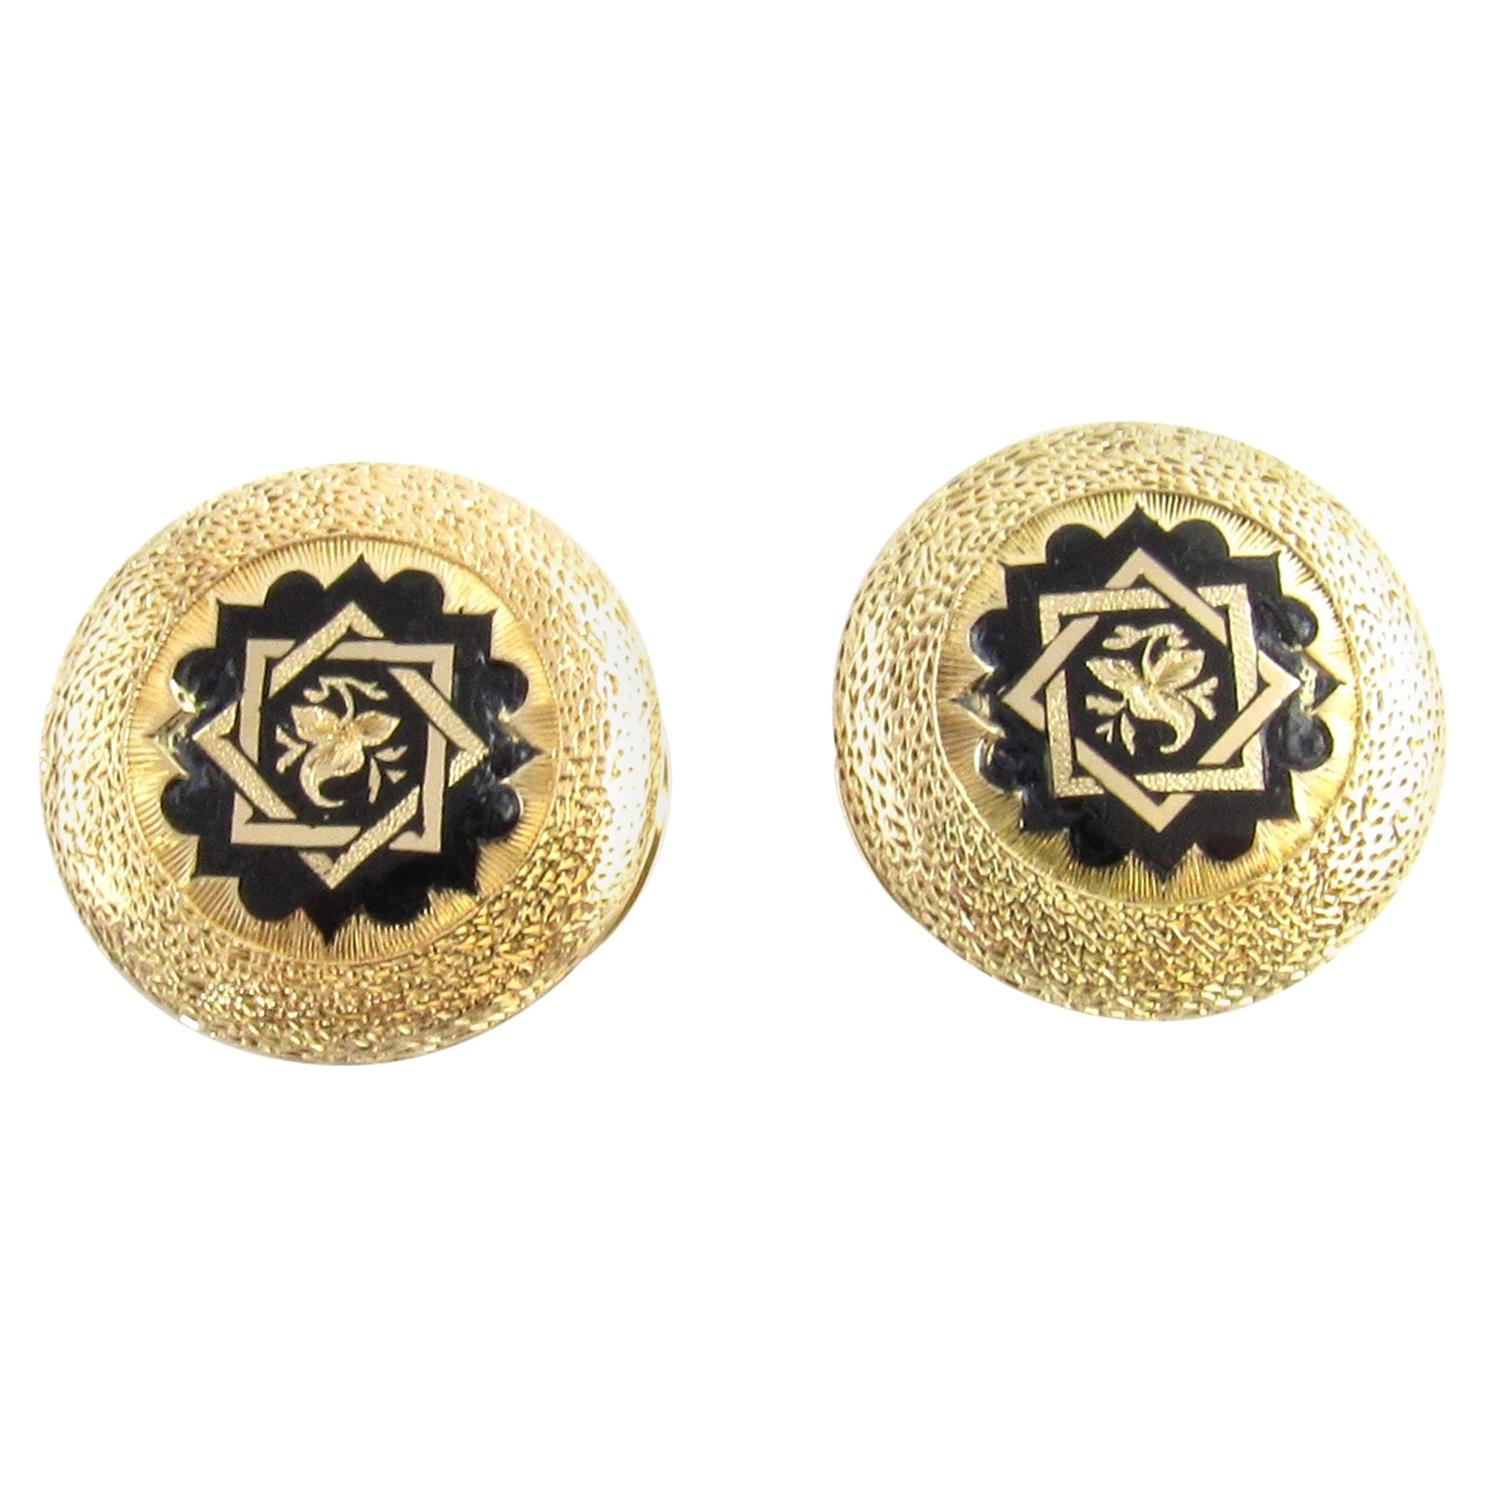 14 Karat Yellow Gold and Enamel Button Covers